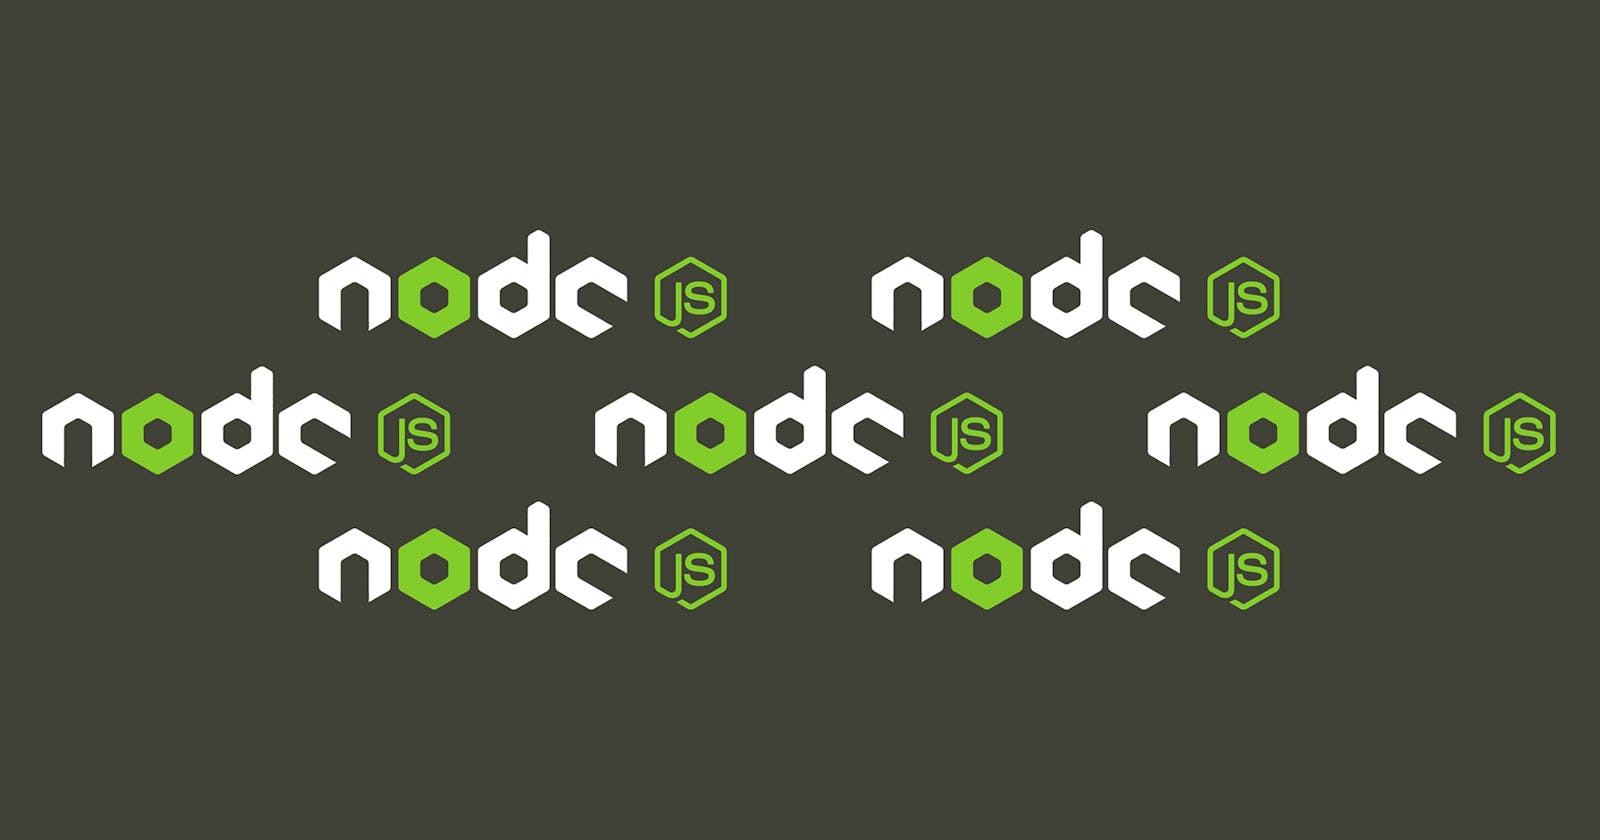 Working with Multiple NodeJS Versions